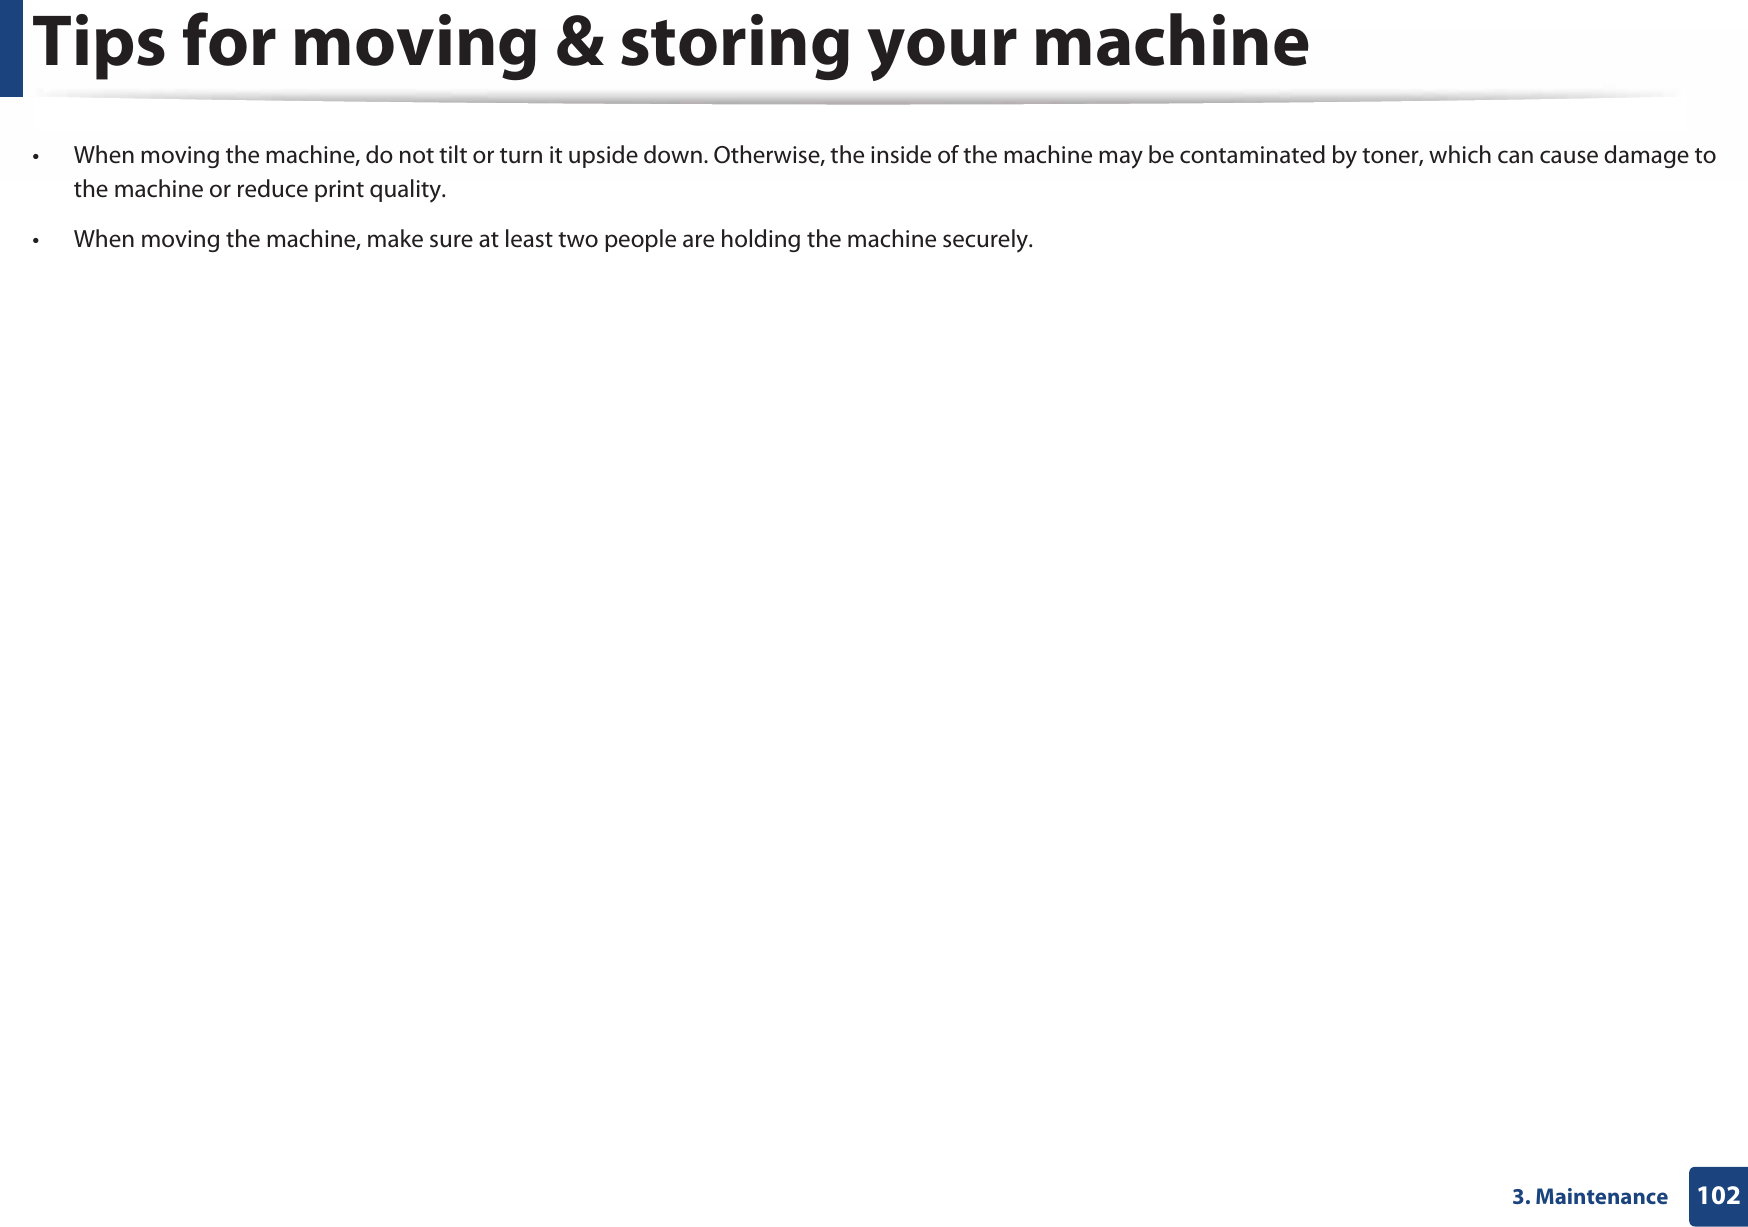 1023. MaintenanceTips for moving &amp; storing your machine• When moving the machine, do not tilt or turn it upside down. Otherwise, the inside of the machine may be contaminated by toner, which can cause damage to the machine or reduce print quality.• When moving the machine, make sure at least two people are holding the machine securely.